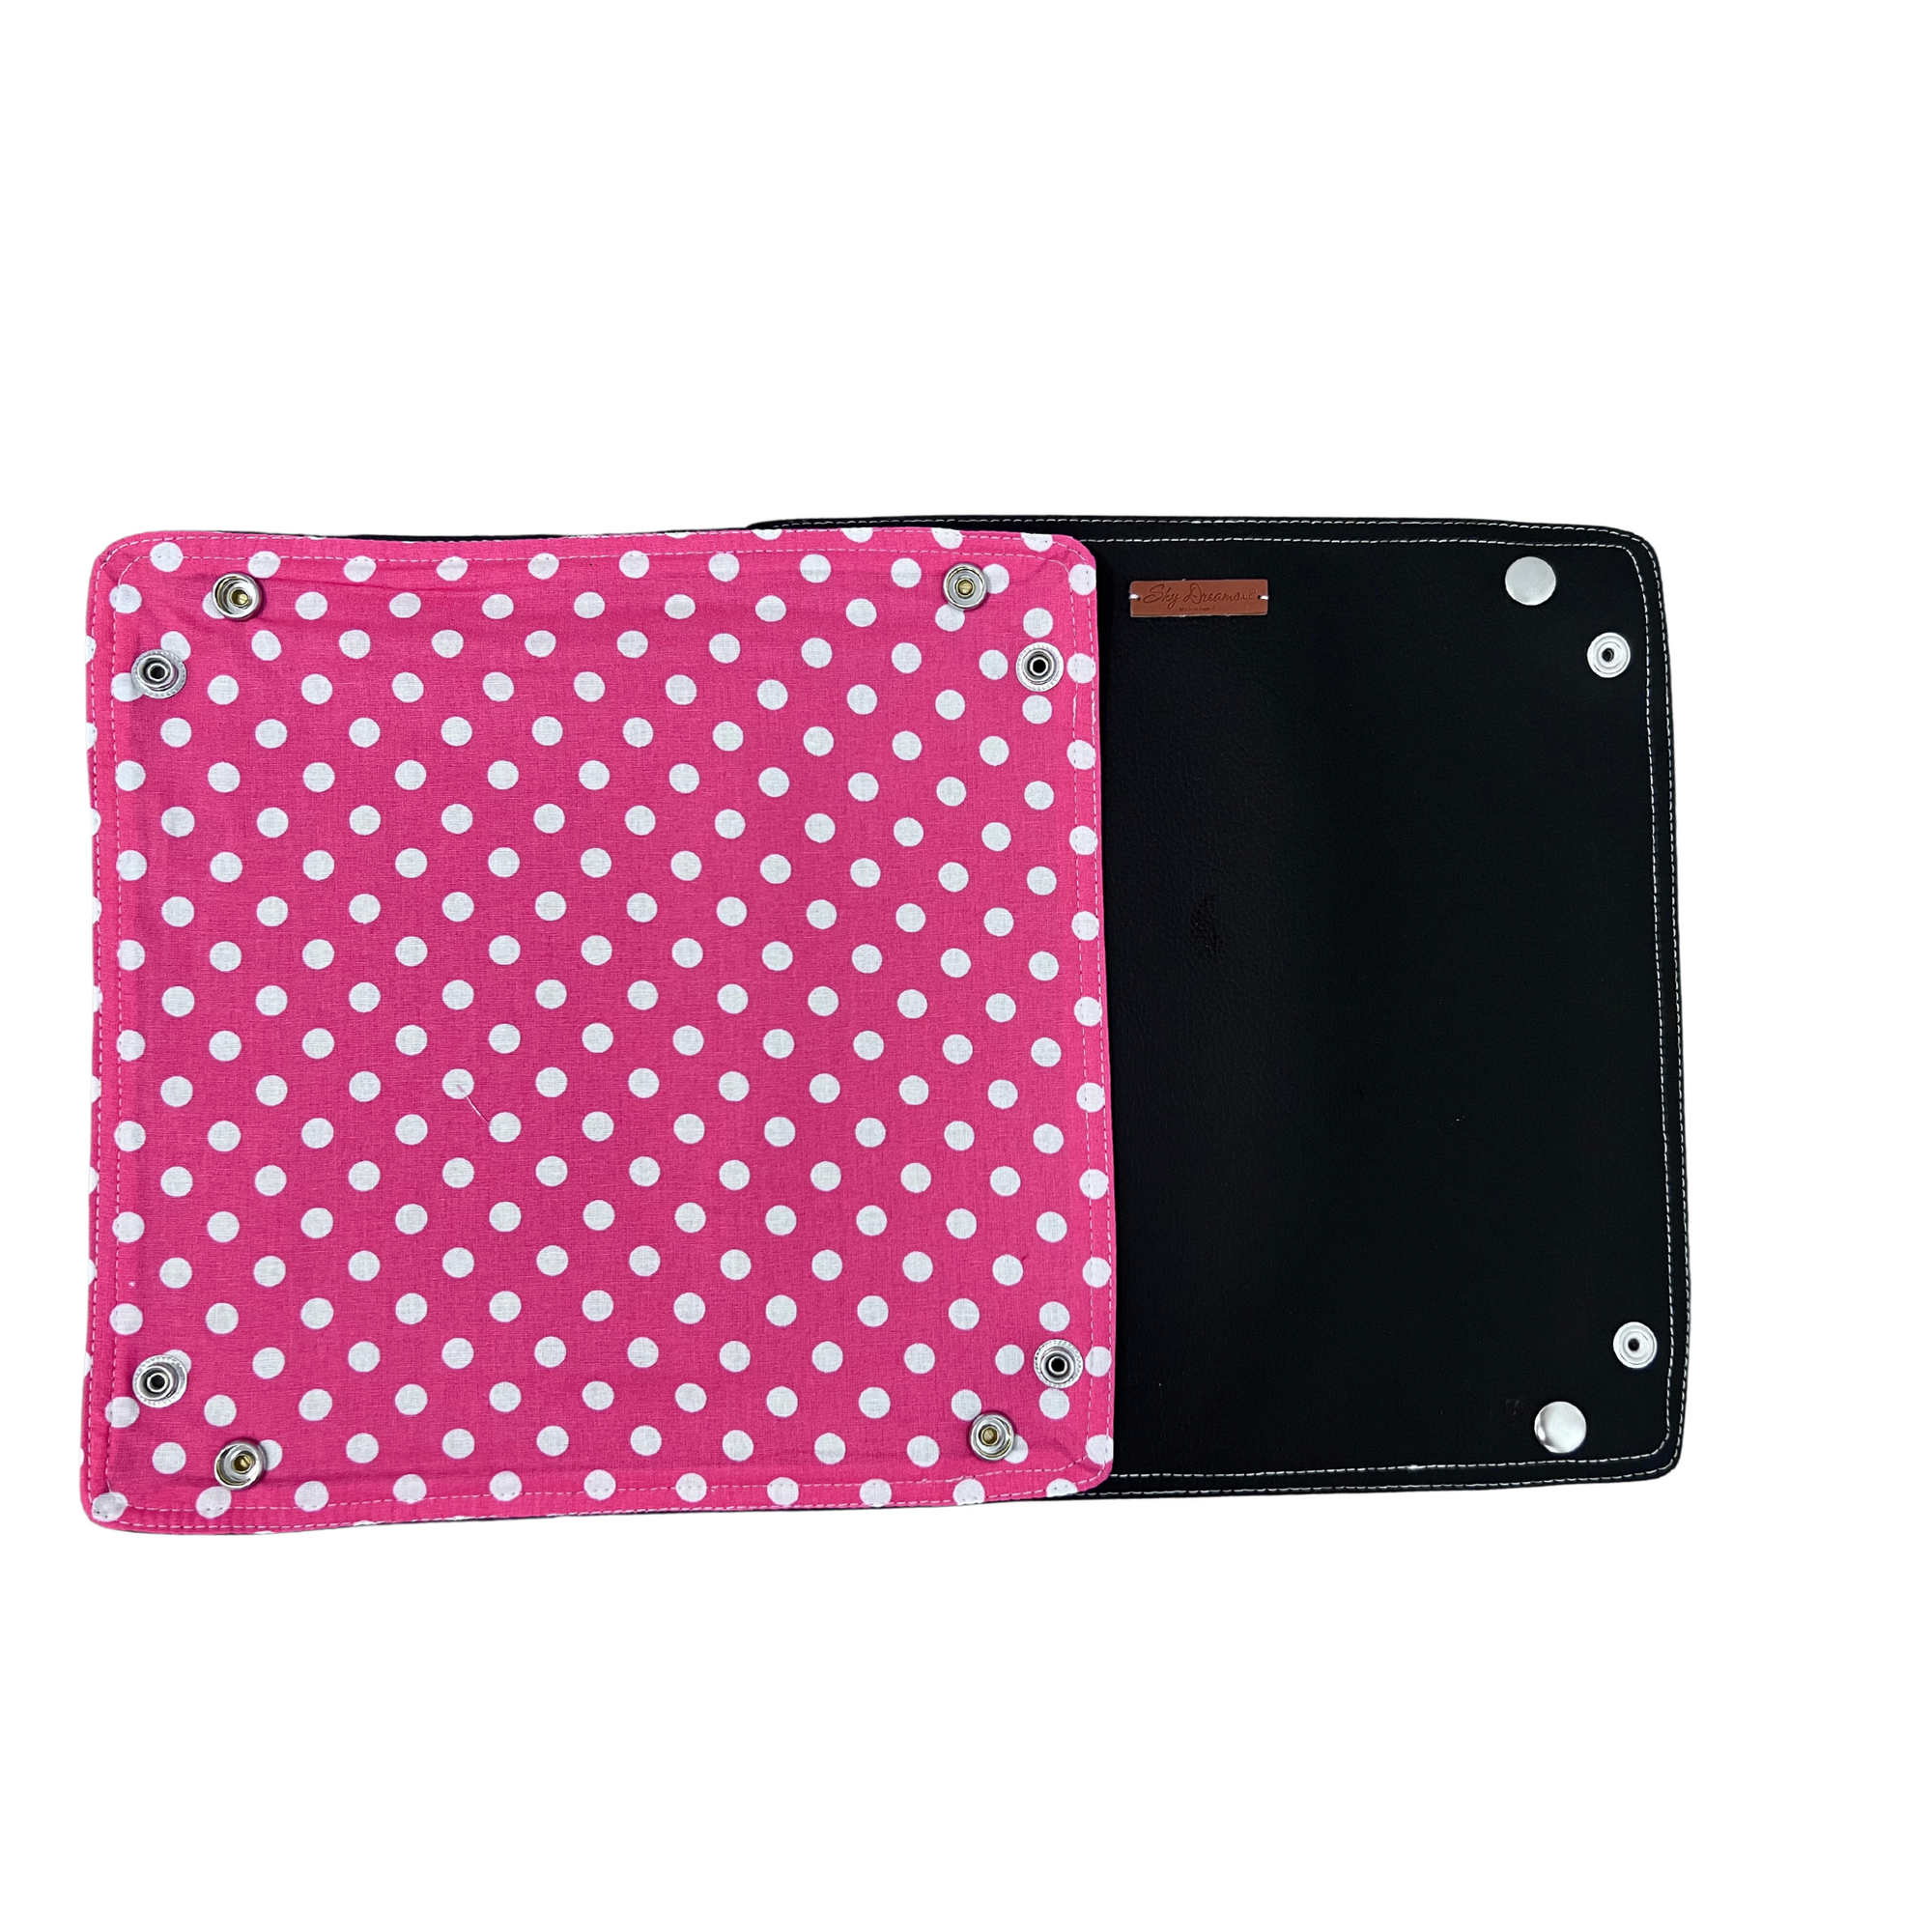 X-Large Travel Valet-Magical Collection Large Pink and White Dots no Bow